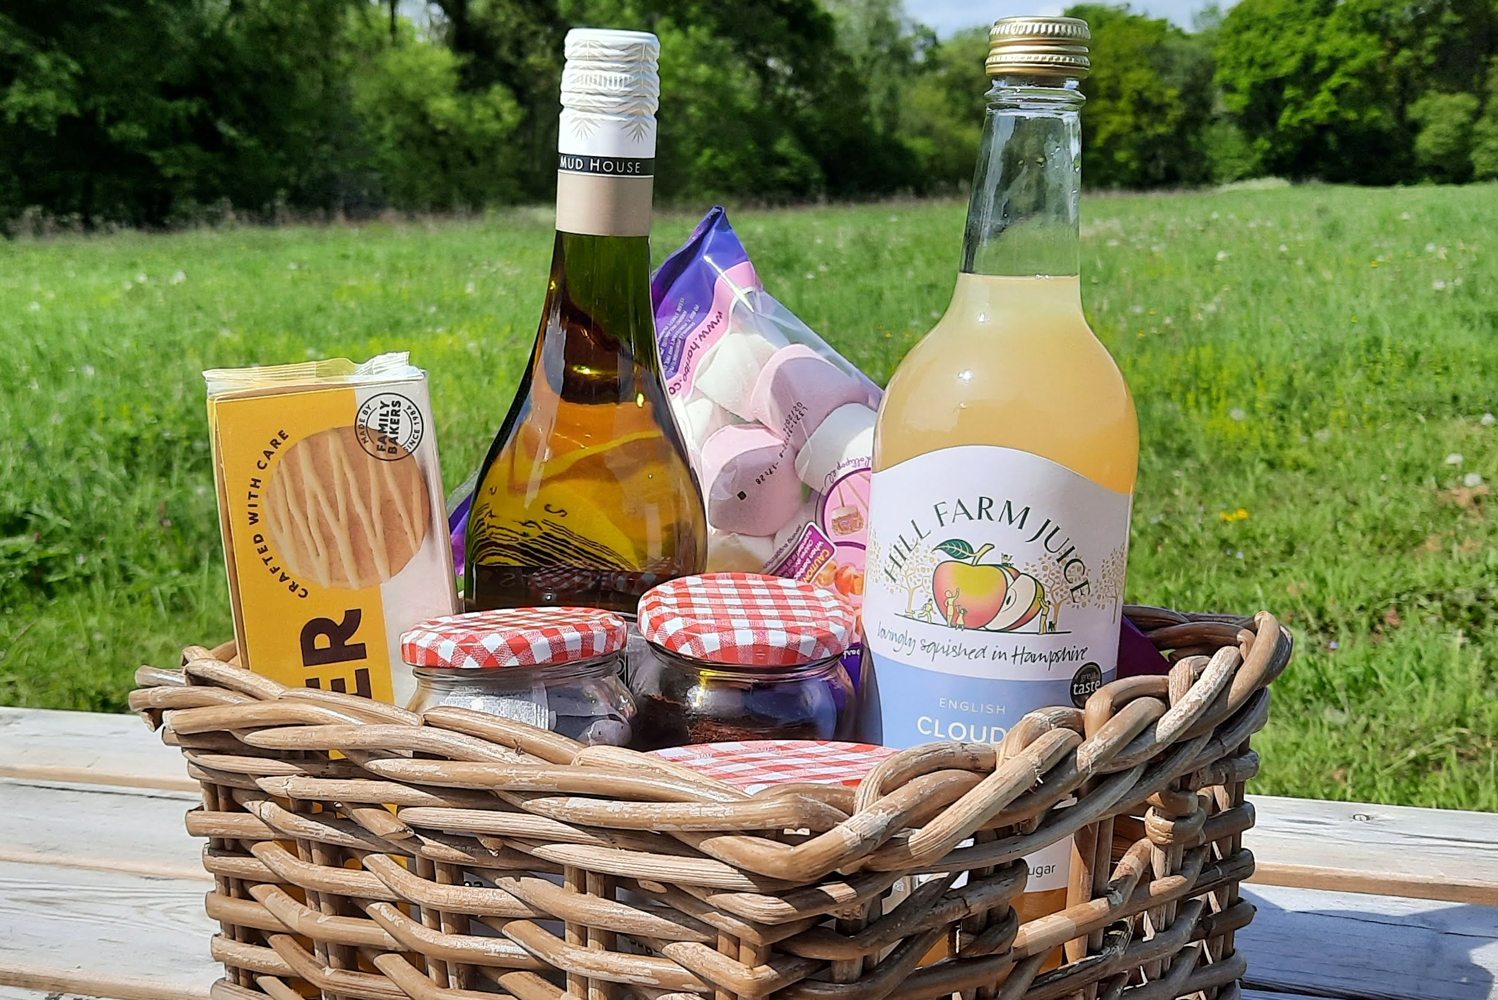 Our Welcome Hamper in a wicker basket on a picnic table surrounded by green grass on a sunny day containing tea, coffee, sugar, locally produced apple juice, wine, marshmallows and biscuits is what to expect in your Shepherd's Hut